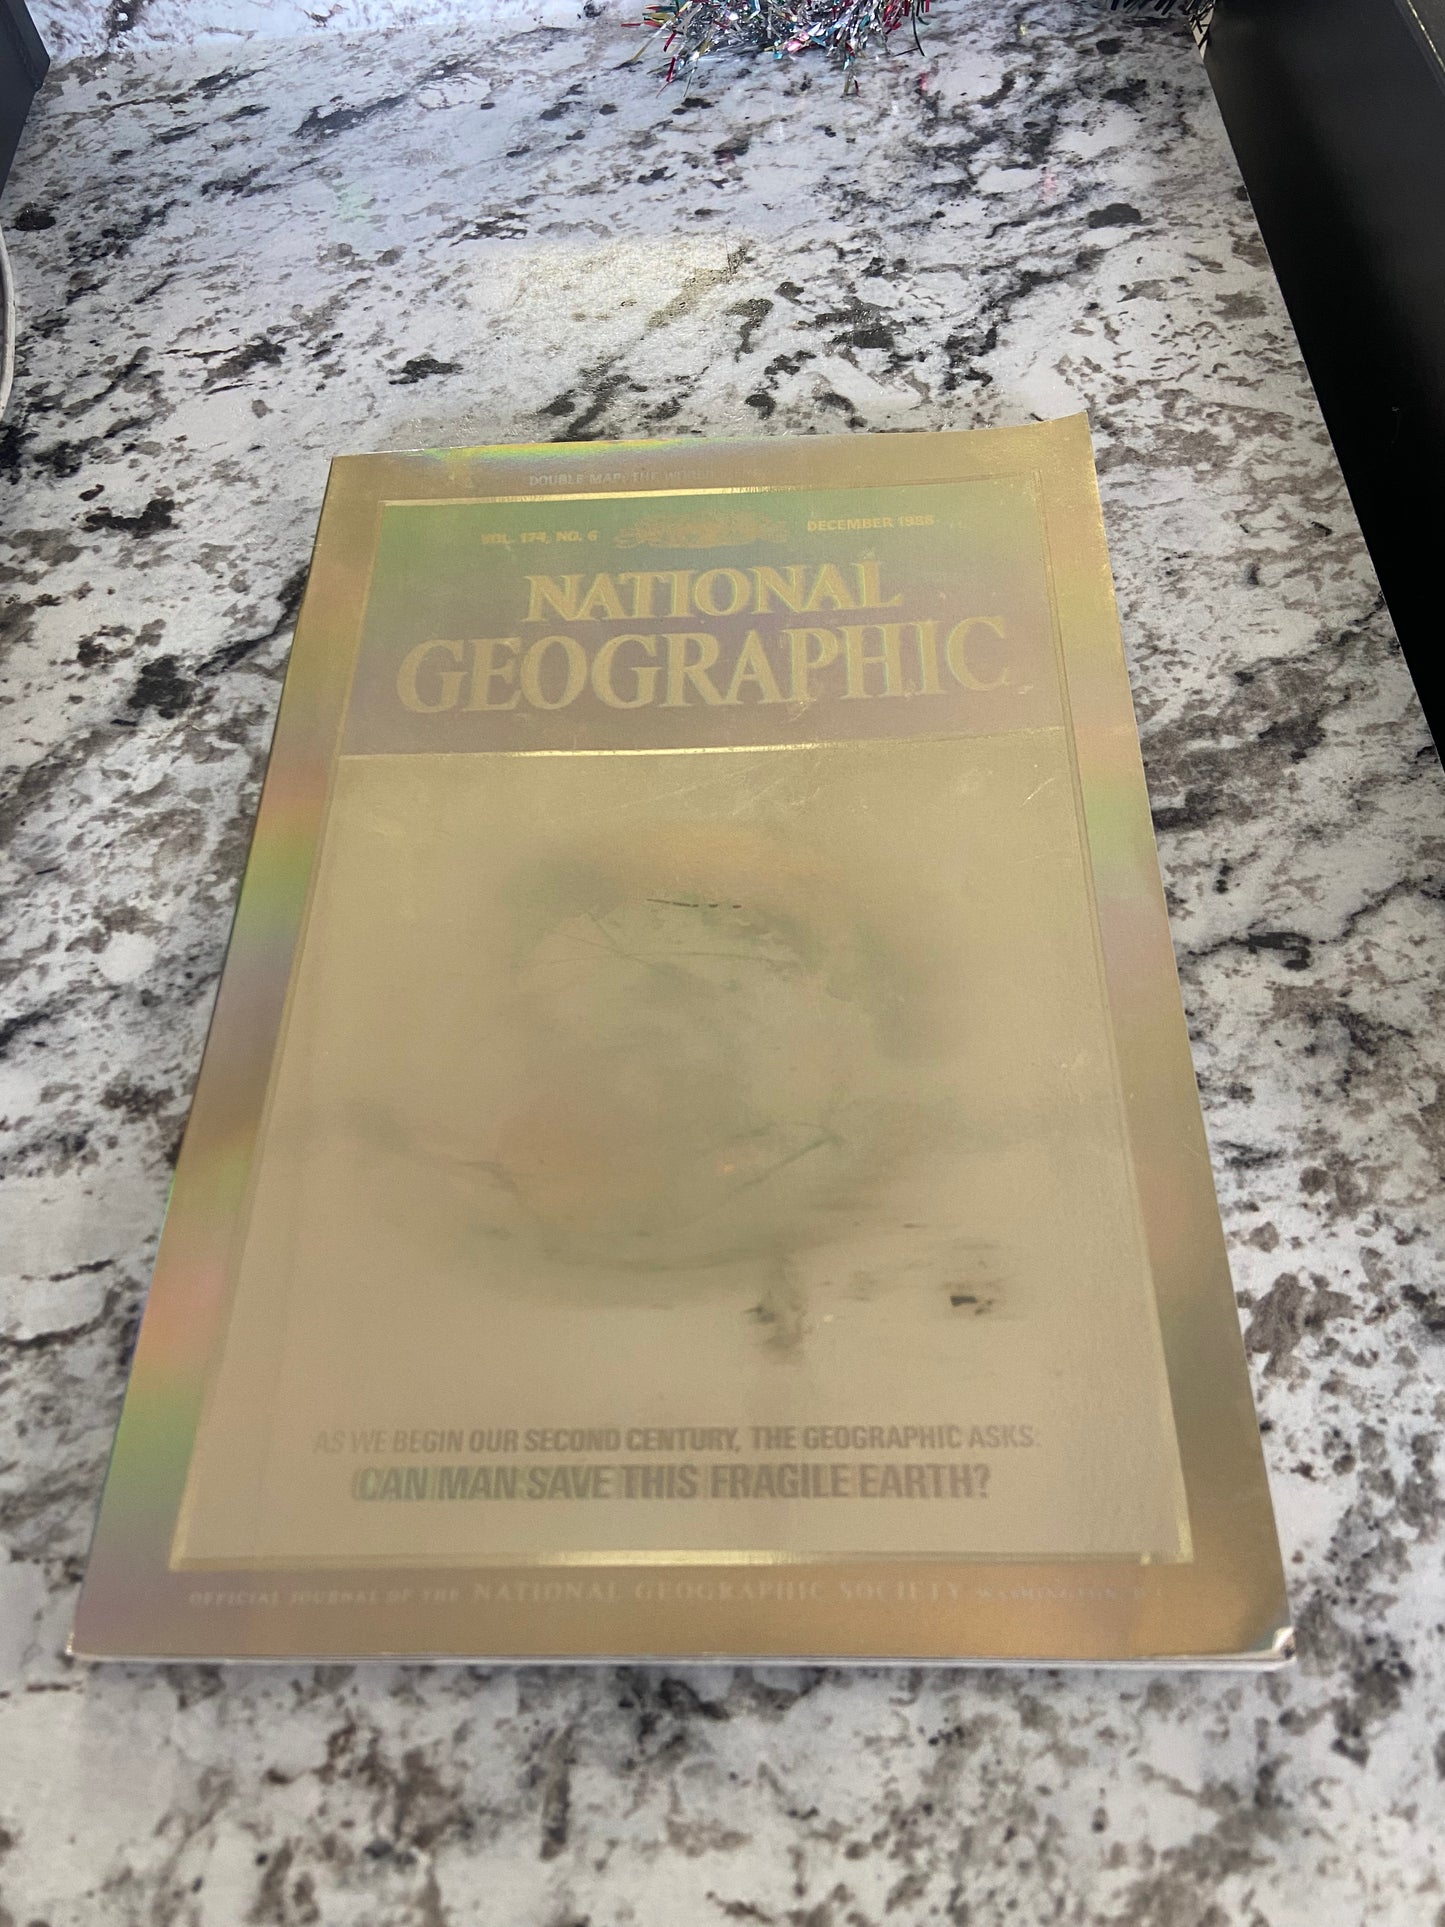 December 1988 National Geographic Magazine with Holographic Cover